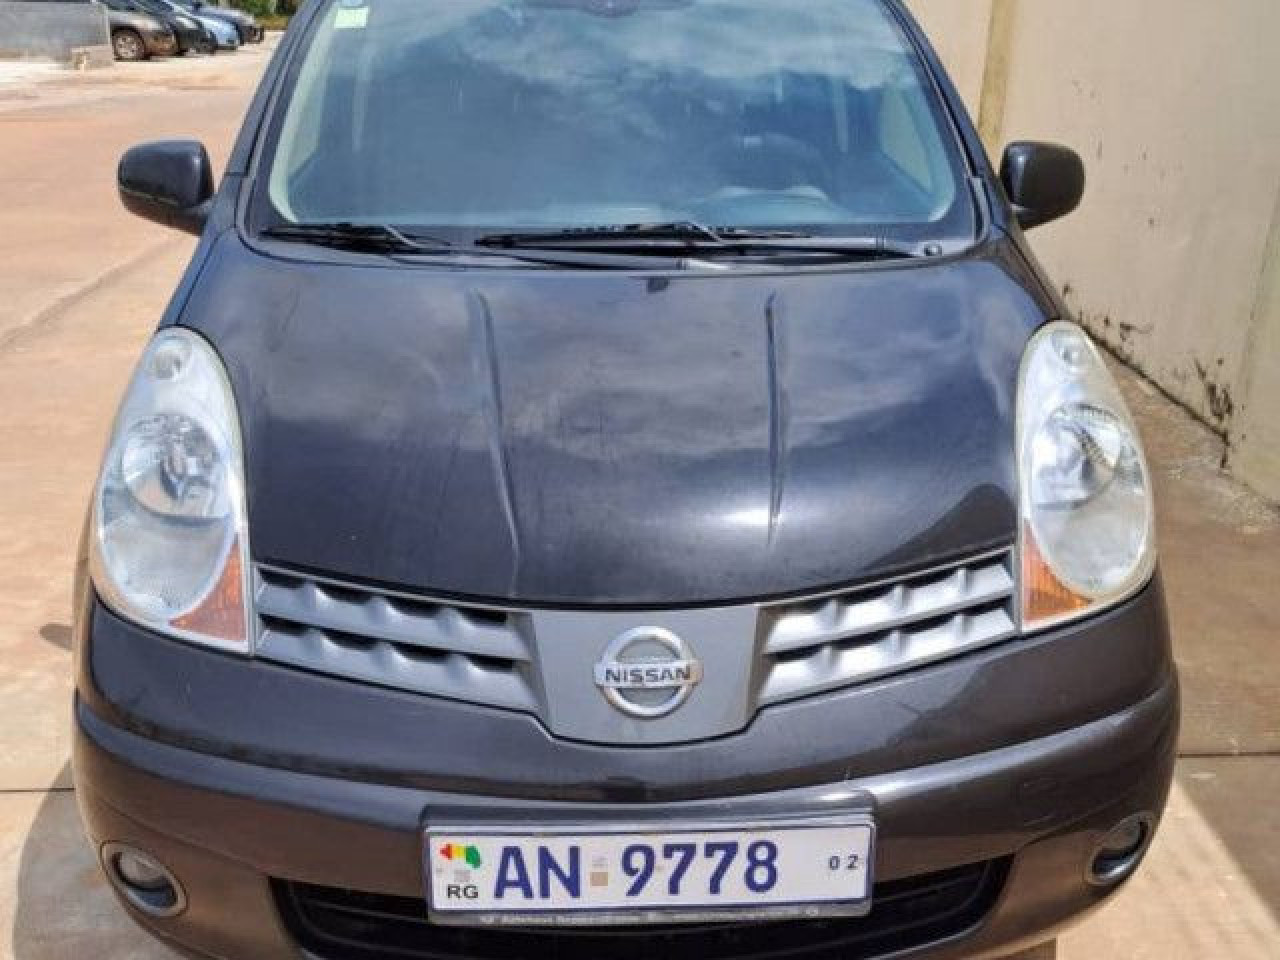 Nissan Note, Voitures, Conakry